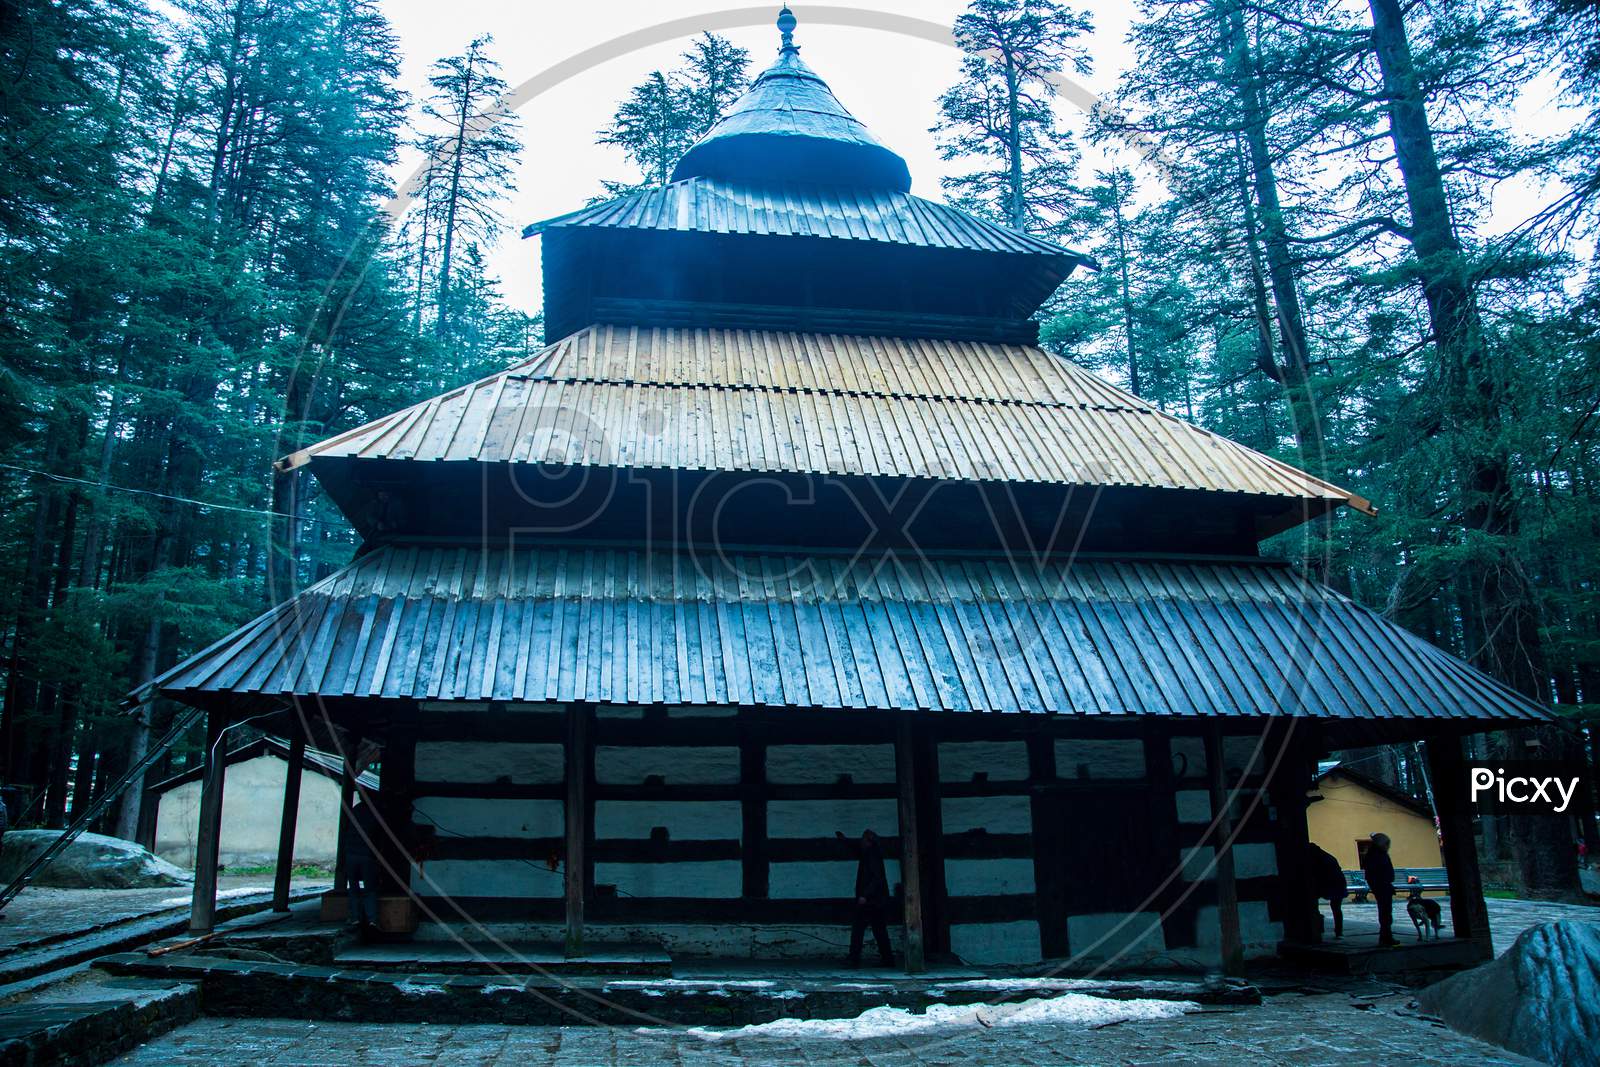 Back View Of Hadimba Temple In Manali, One Of The Oldest And Most Impressive Wooden Temple In India, Surrounded By Forest , Background - Image